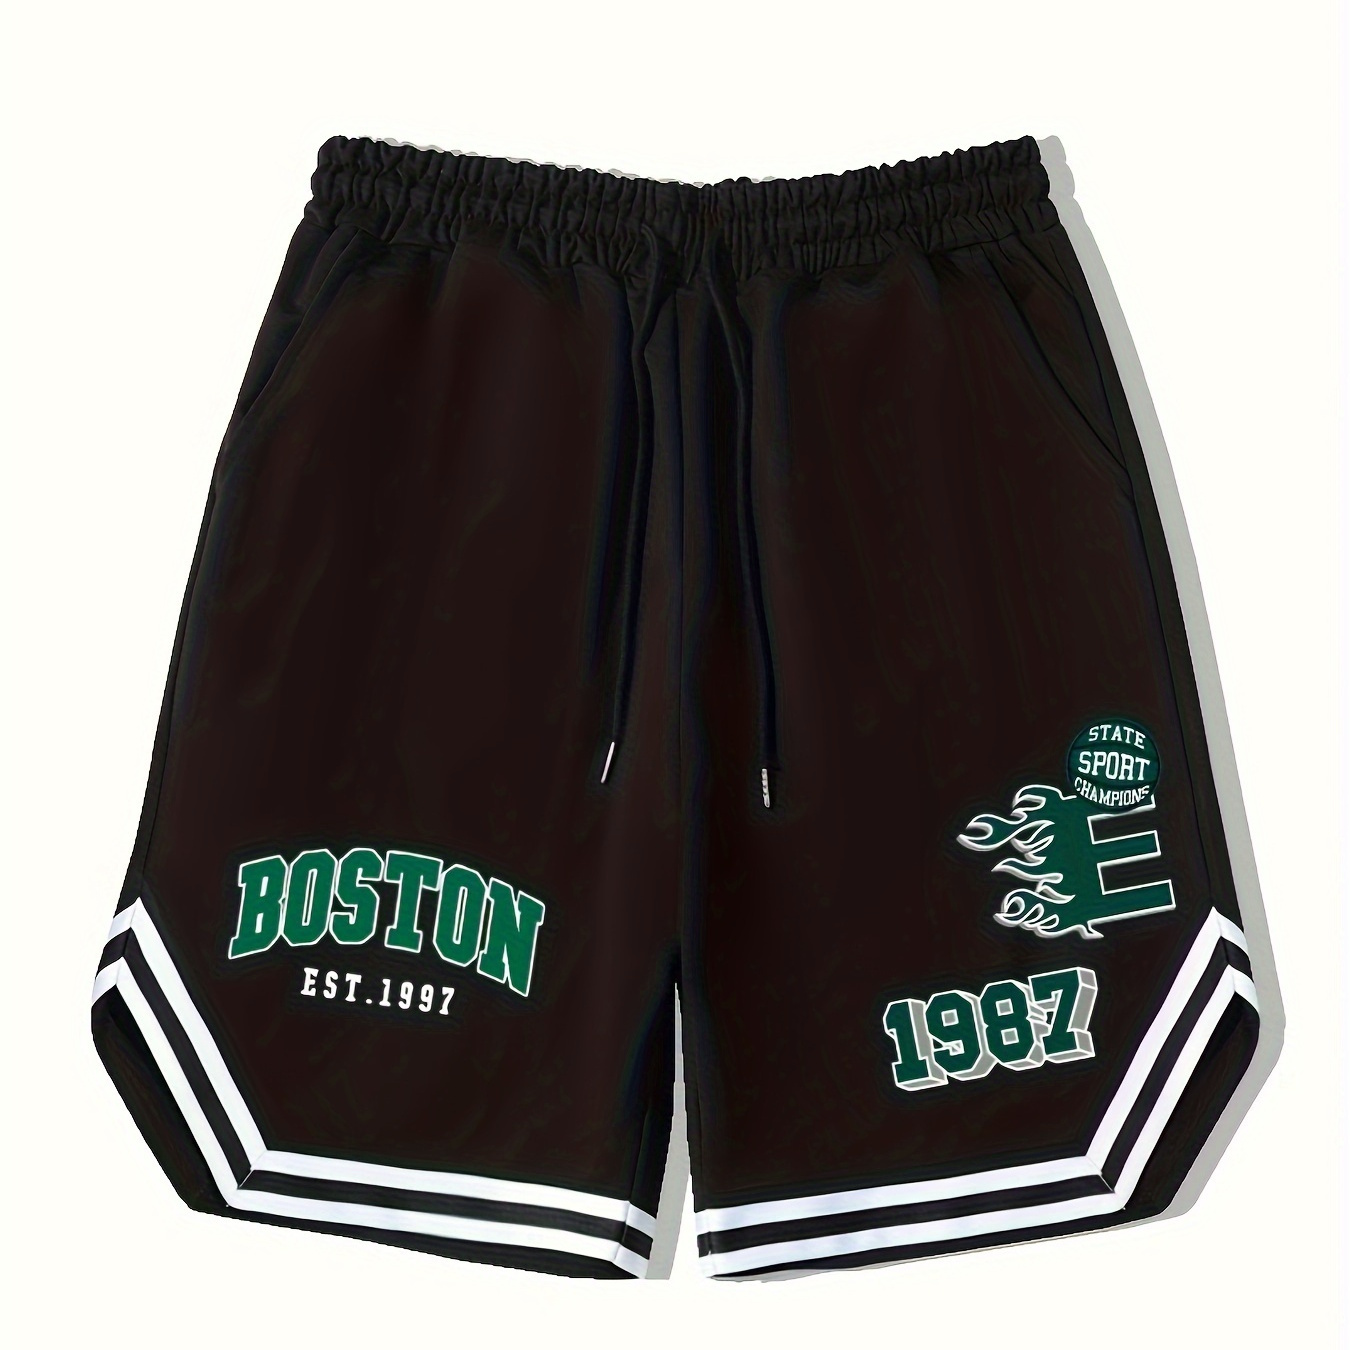 

Men's Streetwear Shorts, "boston" Graphic Drawstring Stretchy Short Pants For Workout Fitness, Summer Clothings Men's Fashion Outfits